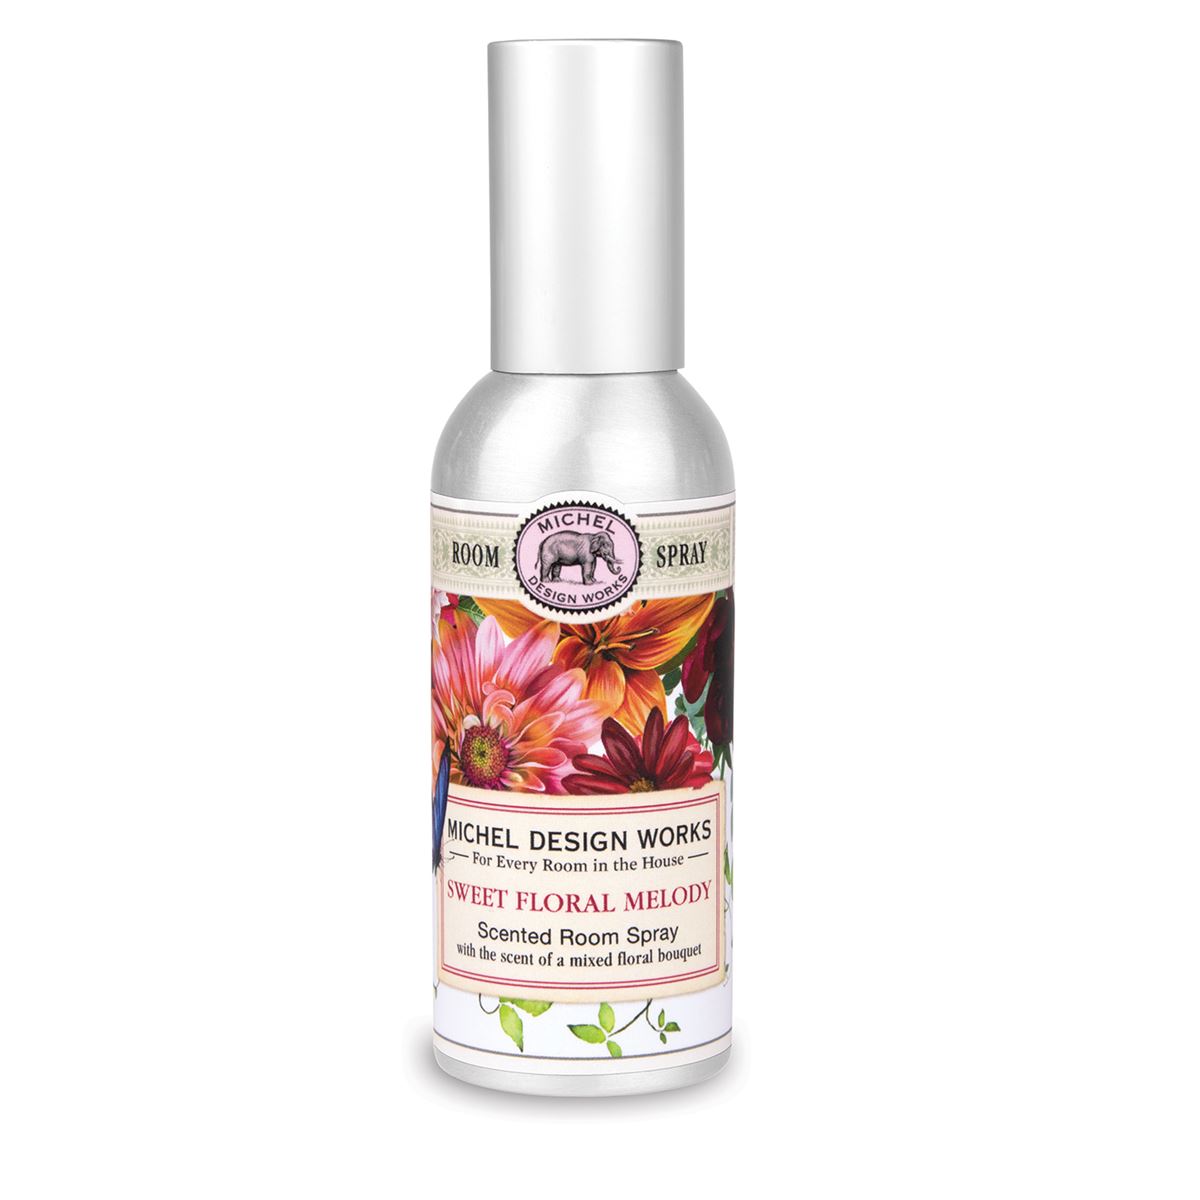 Sweet Floral Melody Room Spray